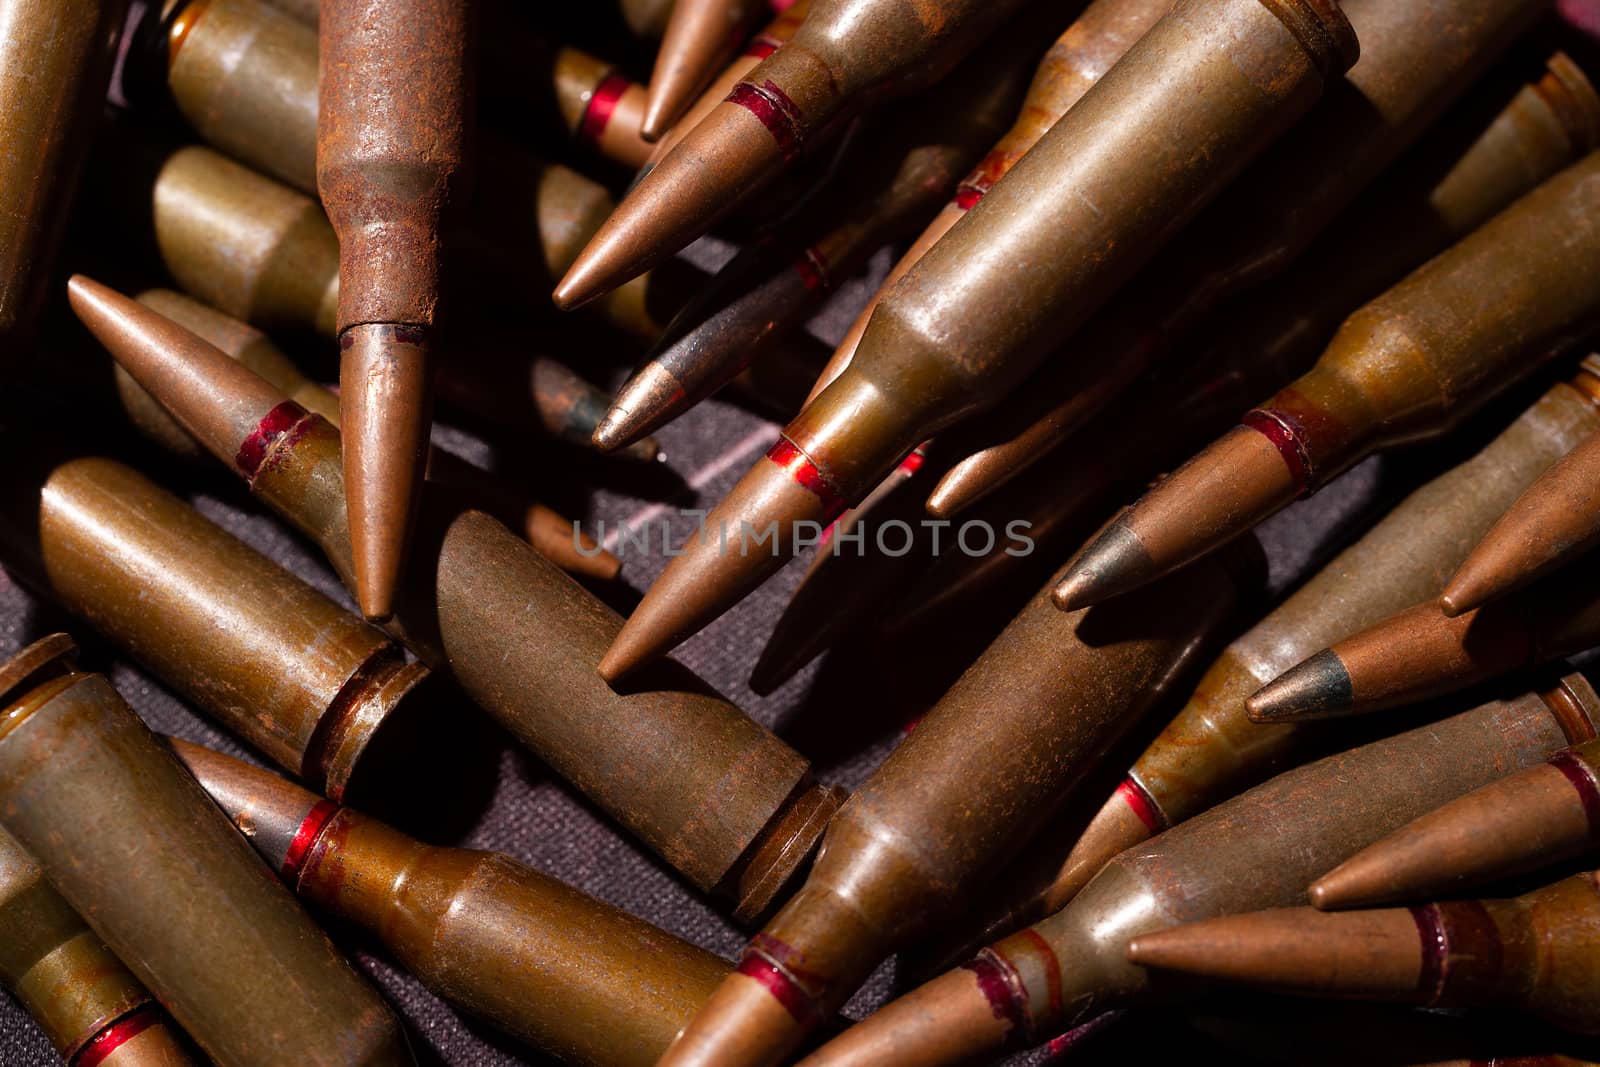 A lot of rifle ammo. AK-47 bullet cartridge. Armor piercing cartridge close up view. Underexposed photo.